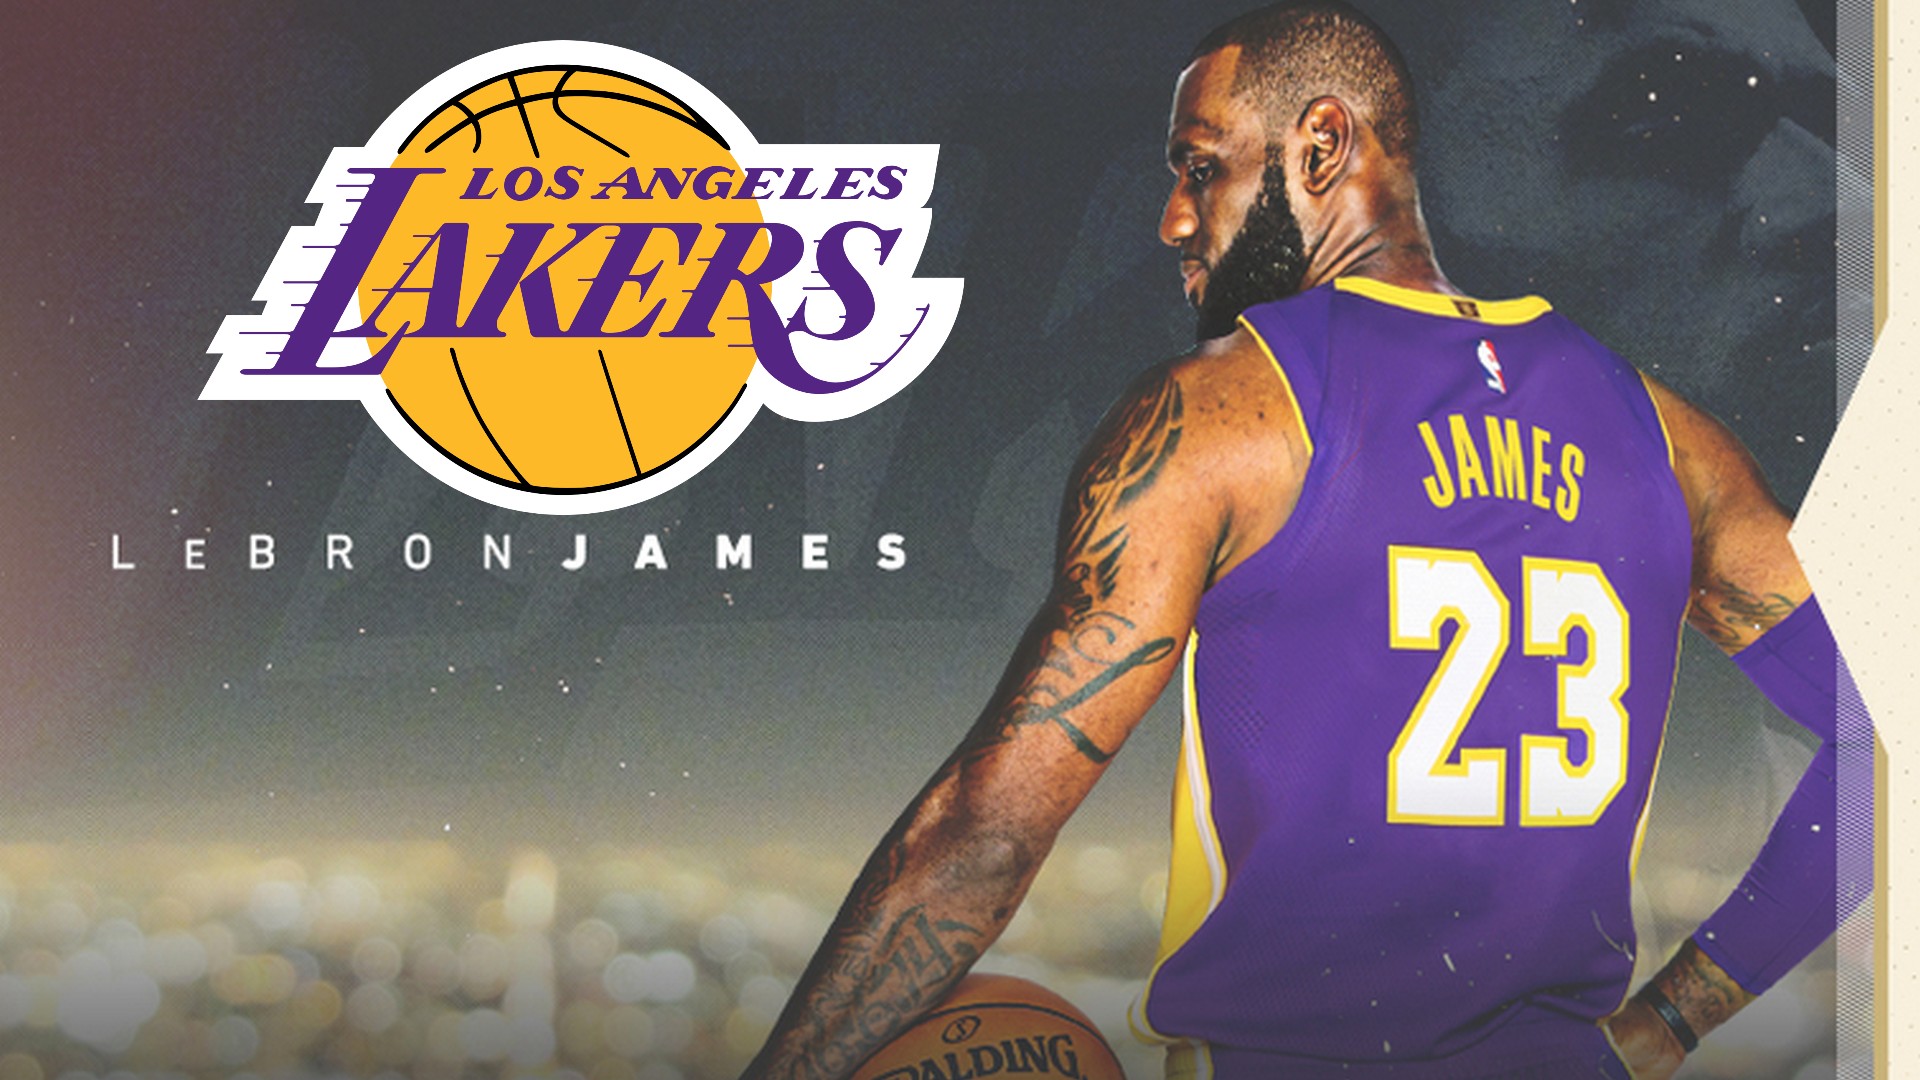 Wallpapers Hd Lebron James Lakers With Image Dimensions - Lebron James  Desktop Wallpaper Lakers - 1920x1080 Wallpaper 